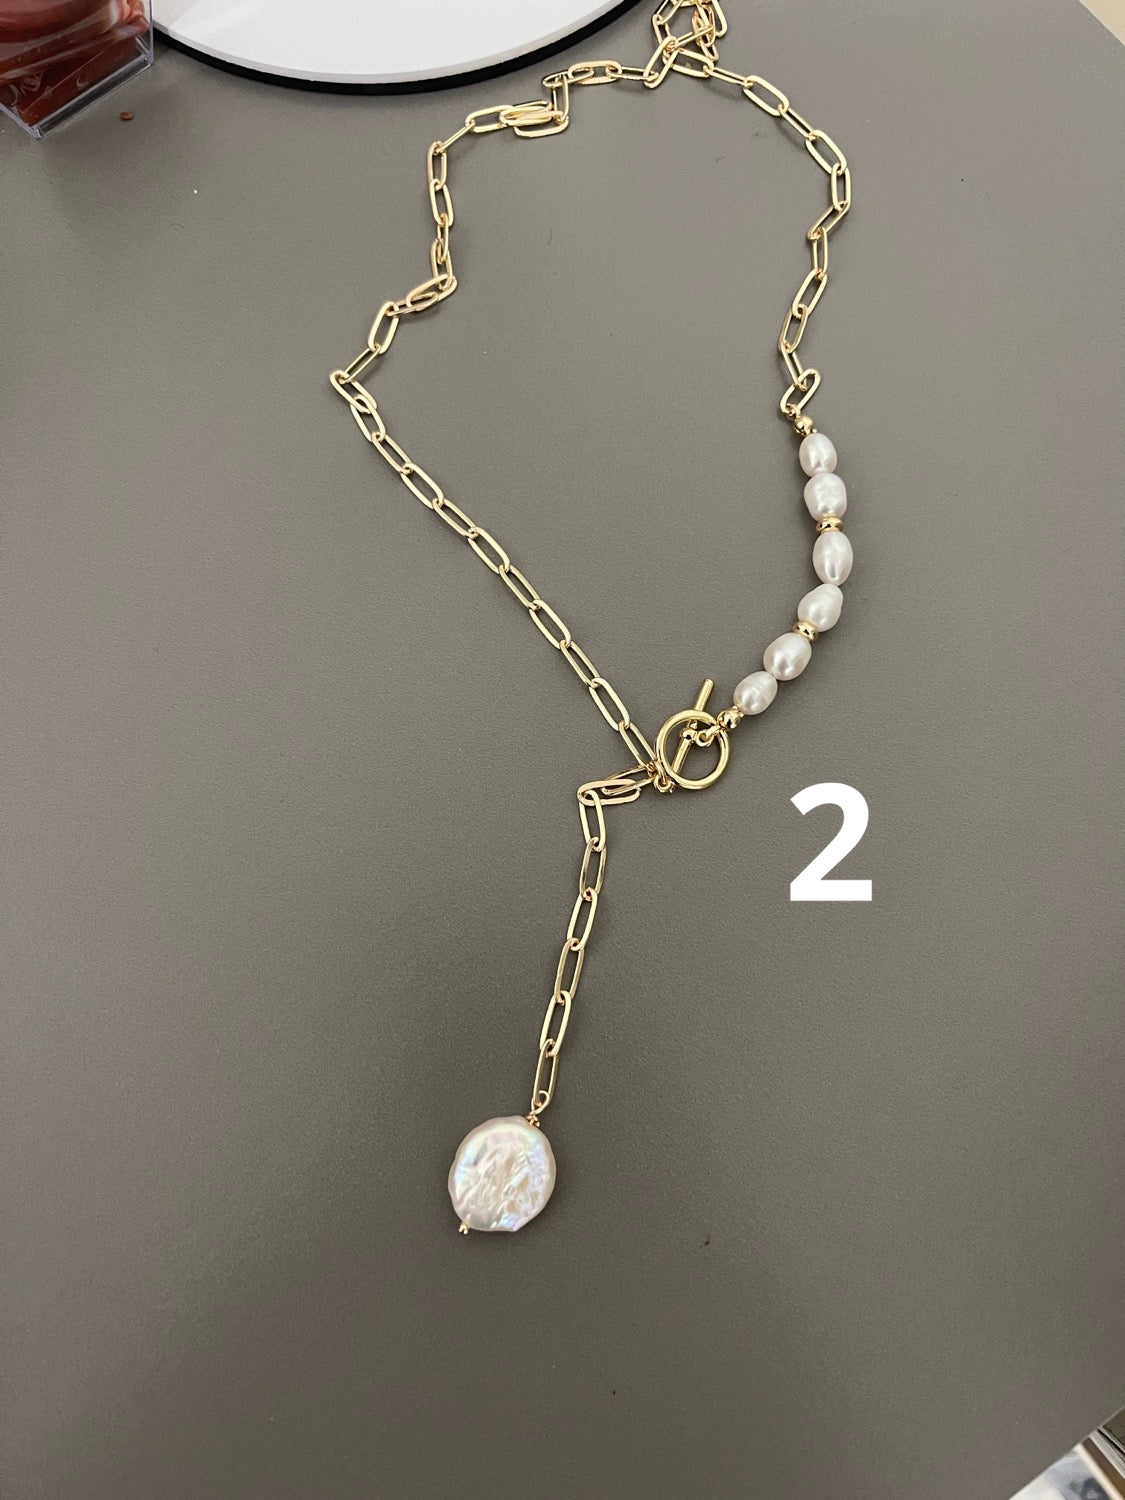 Necklace with pearl and 18k chain, length in description